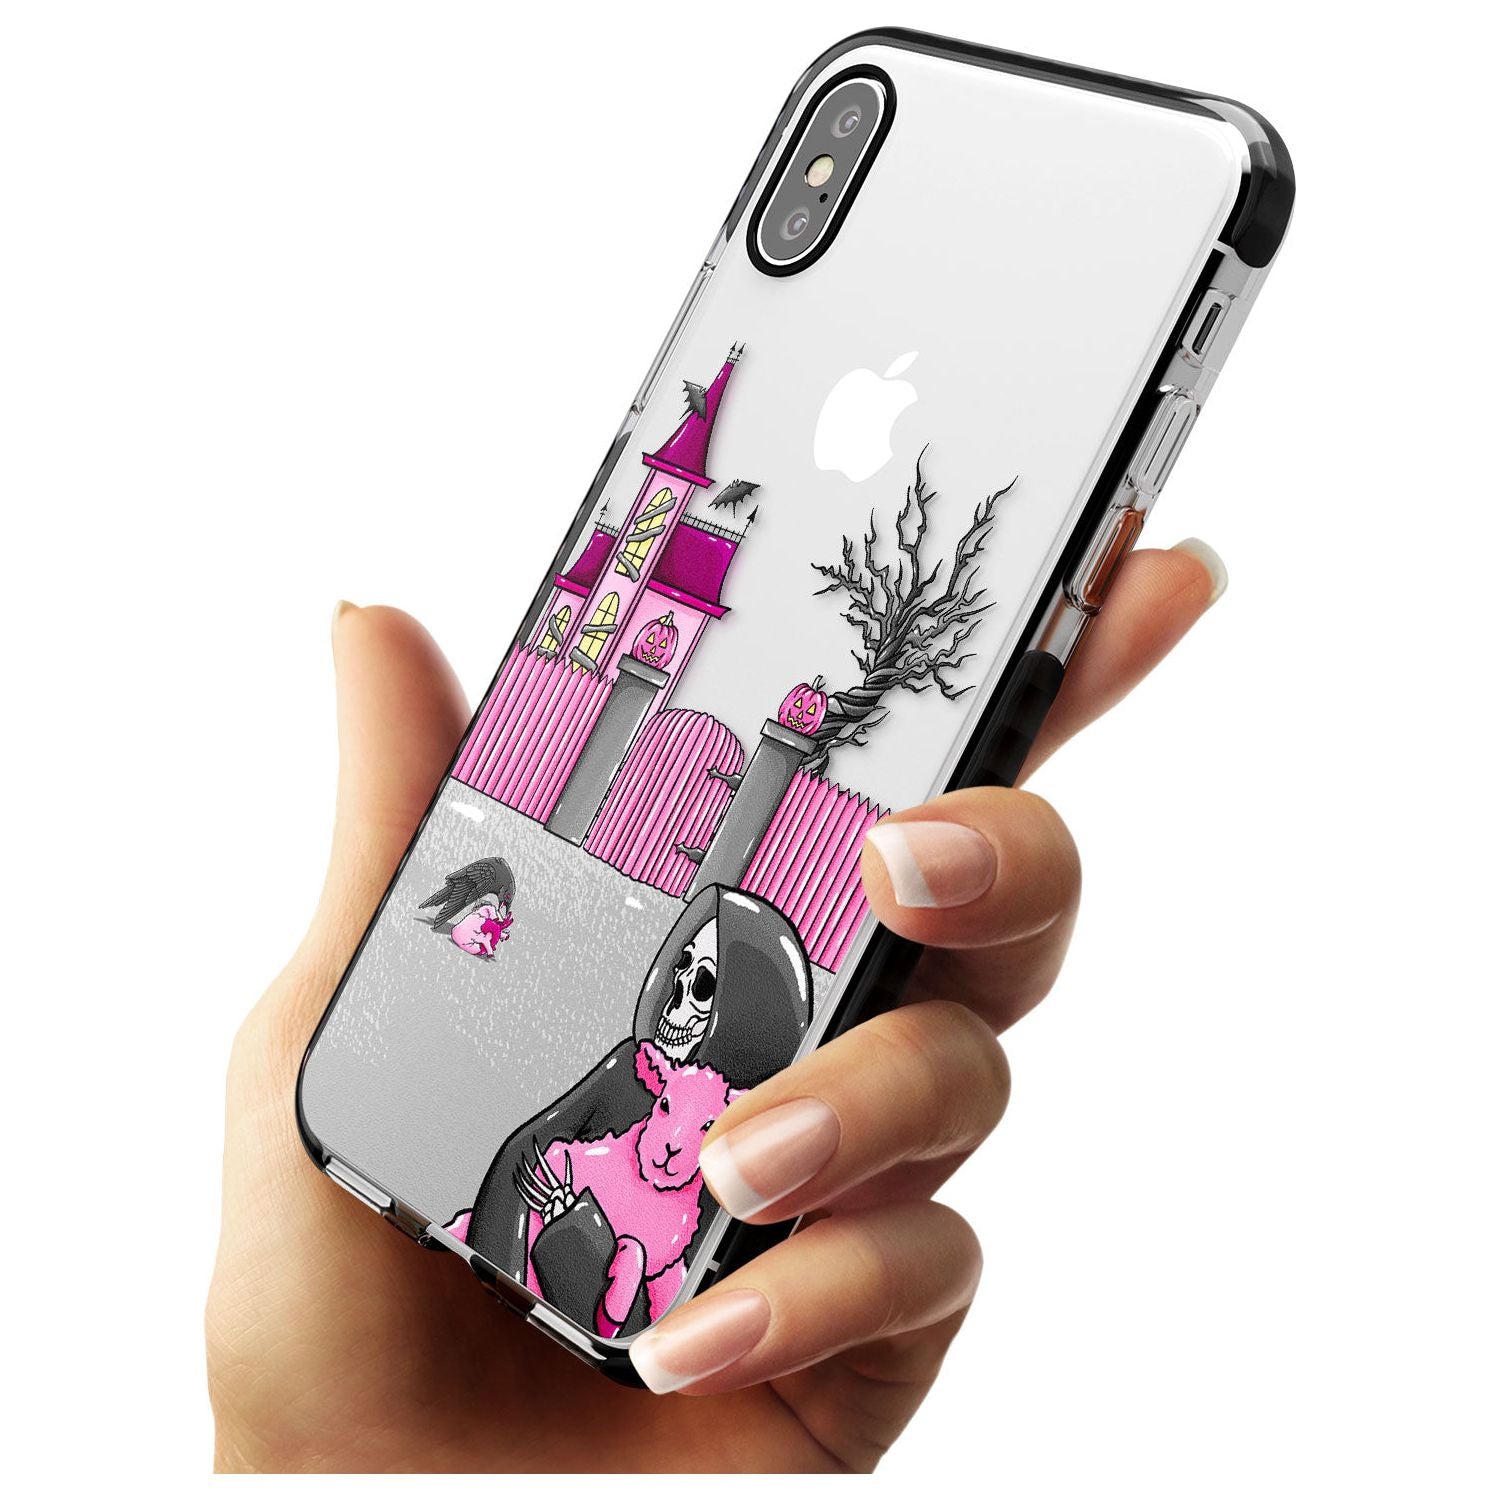 Left With My Heart Black Impact Phone Case for iPhone X XS Max XR